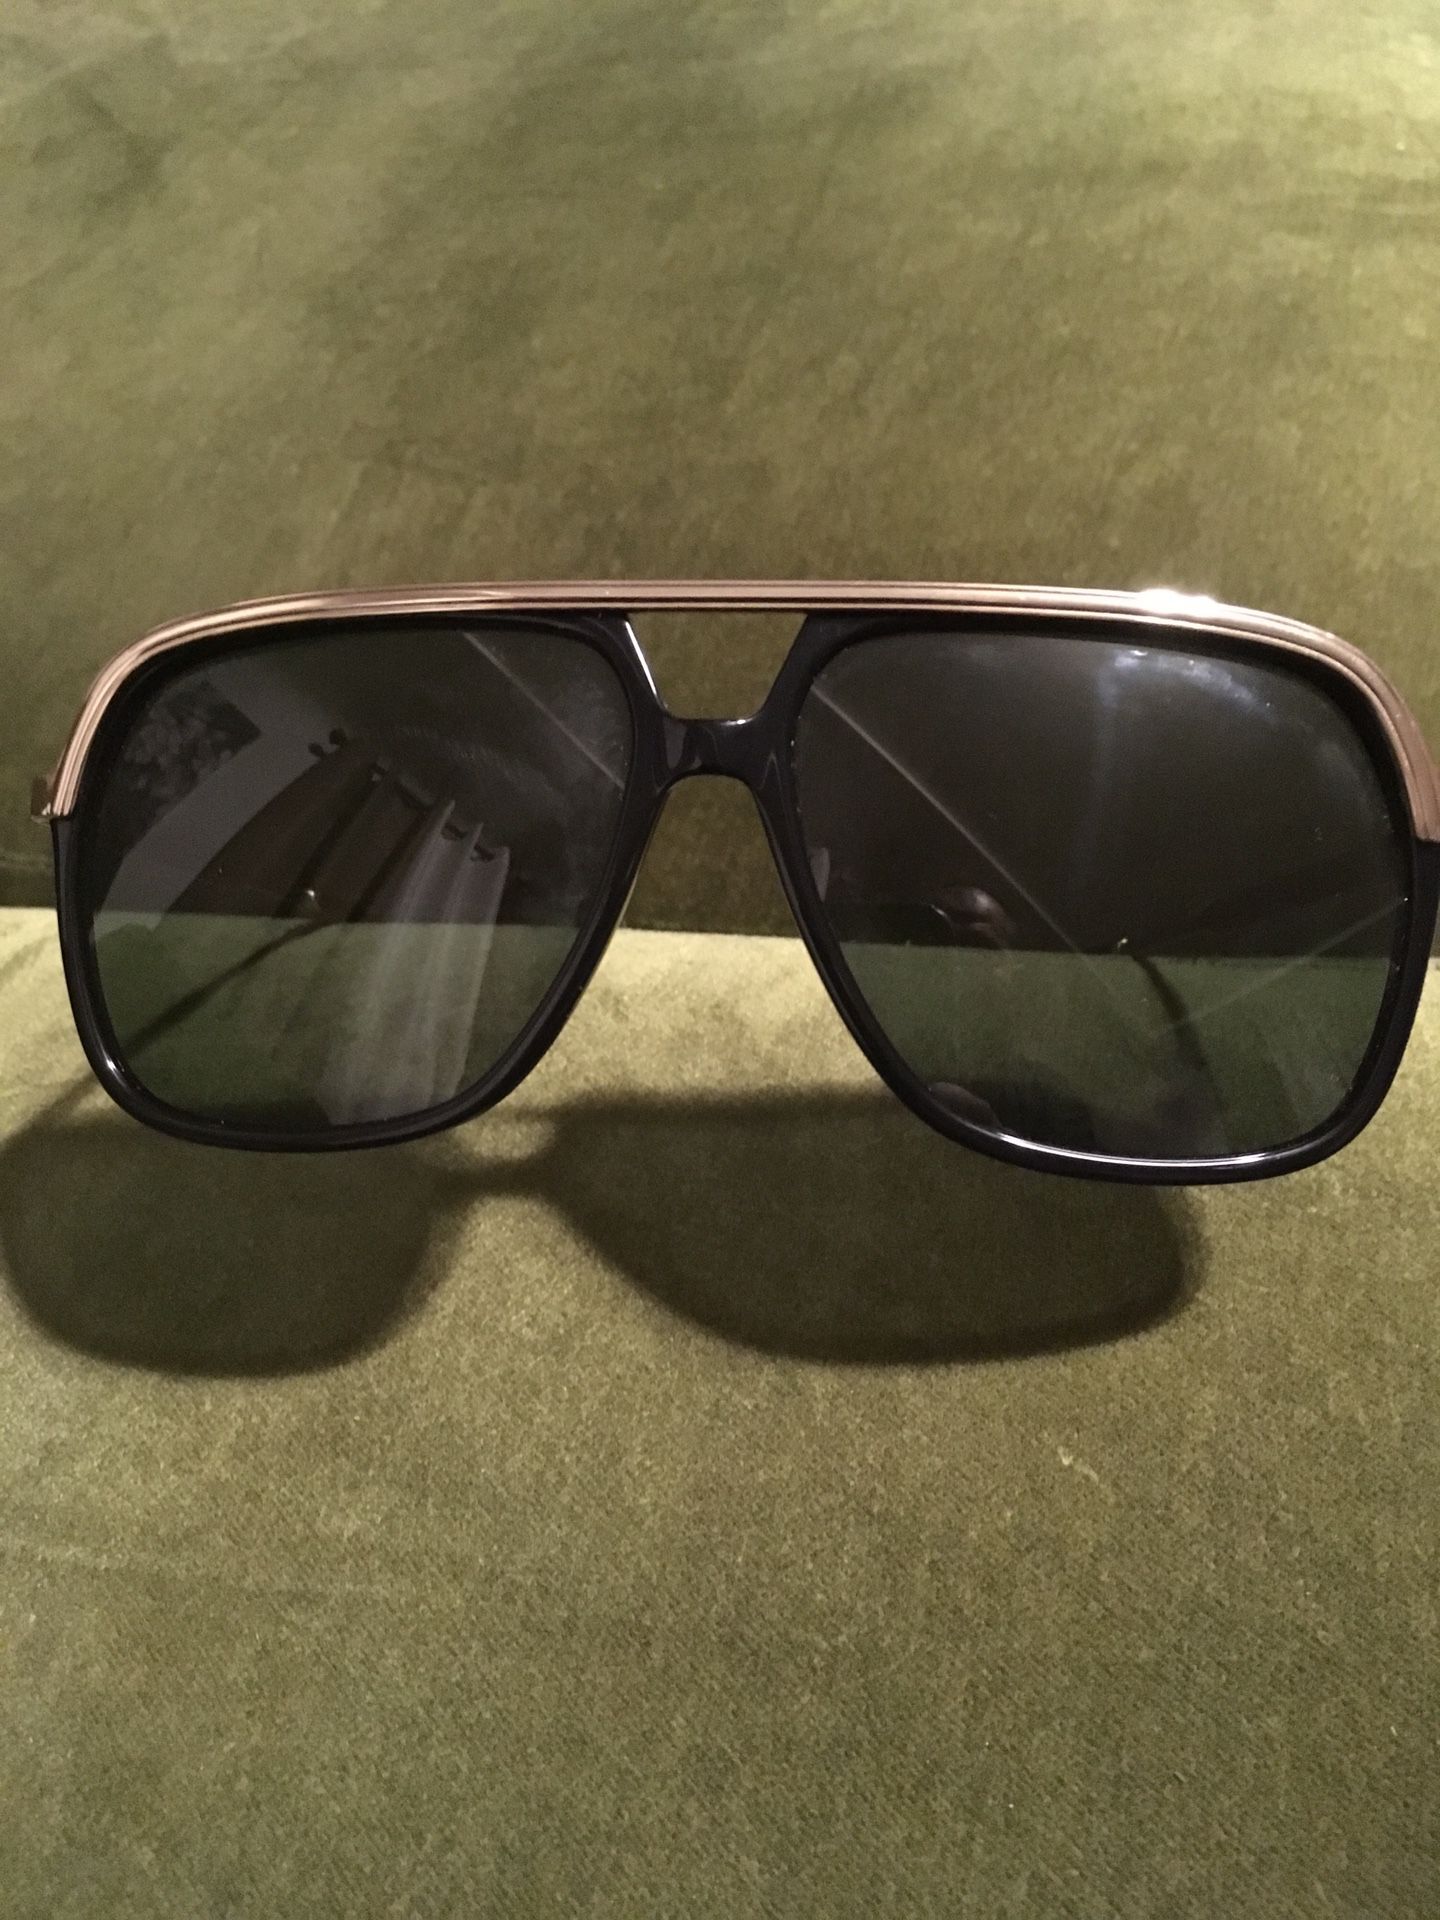 Gucci brand sunglasses . Made in Japan